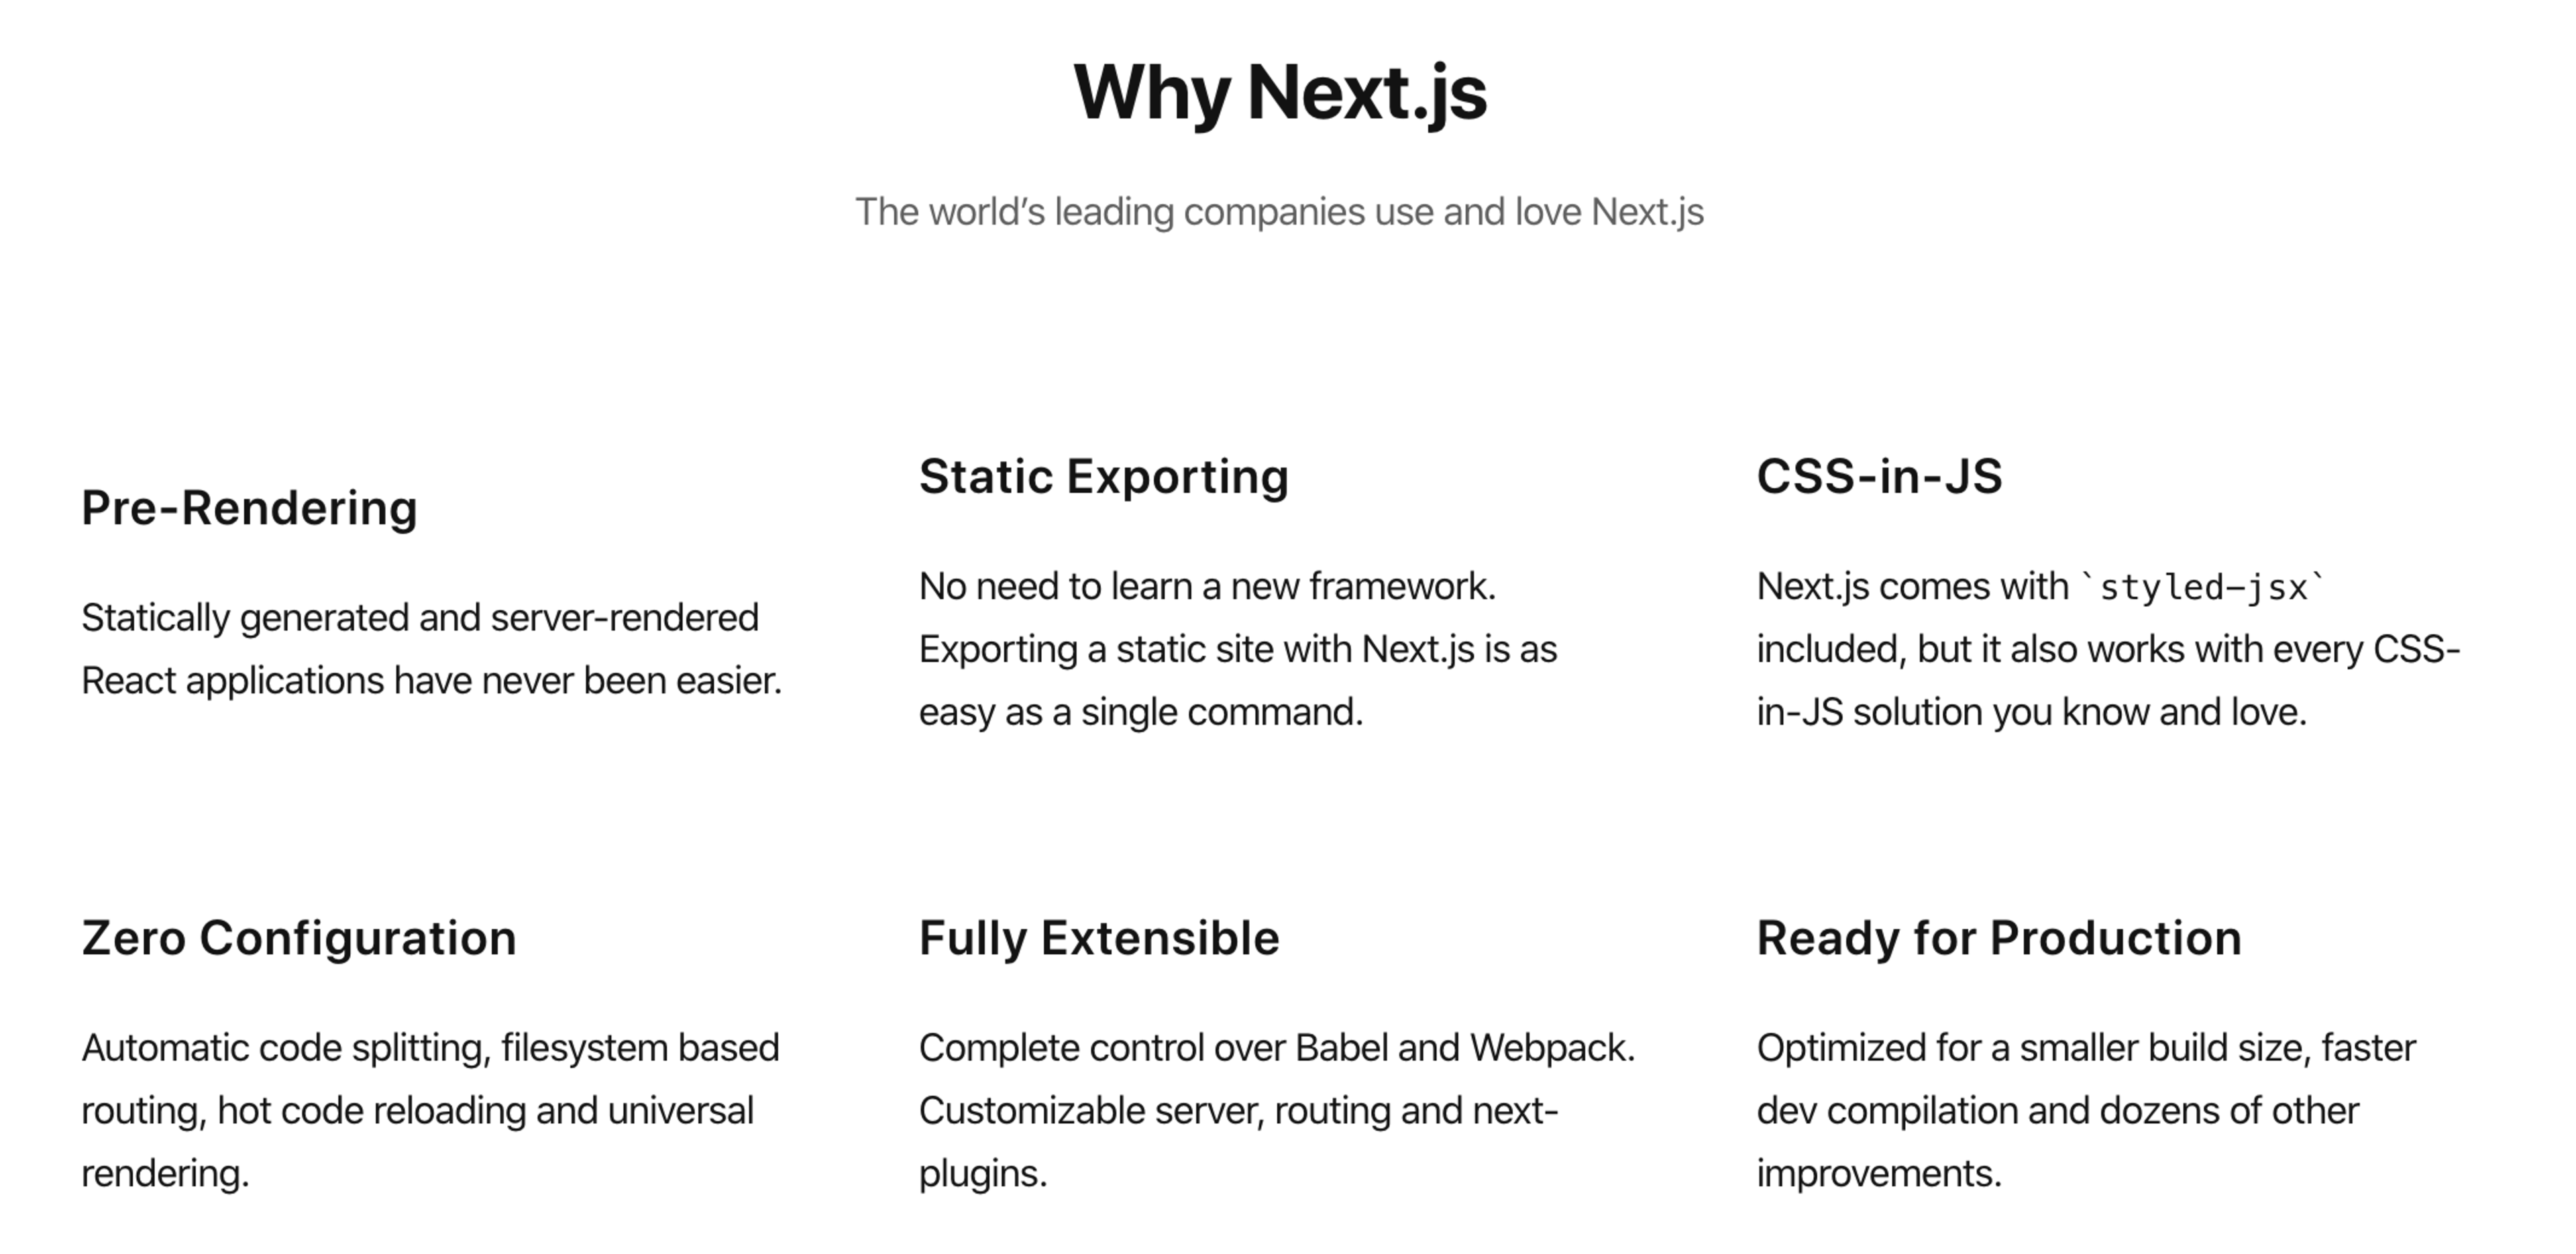 Why Next.js